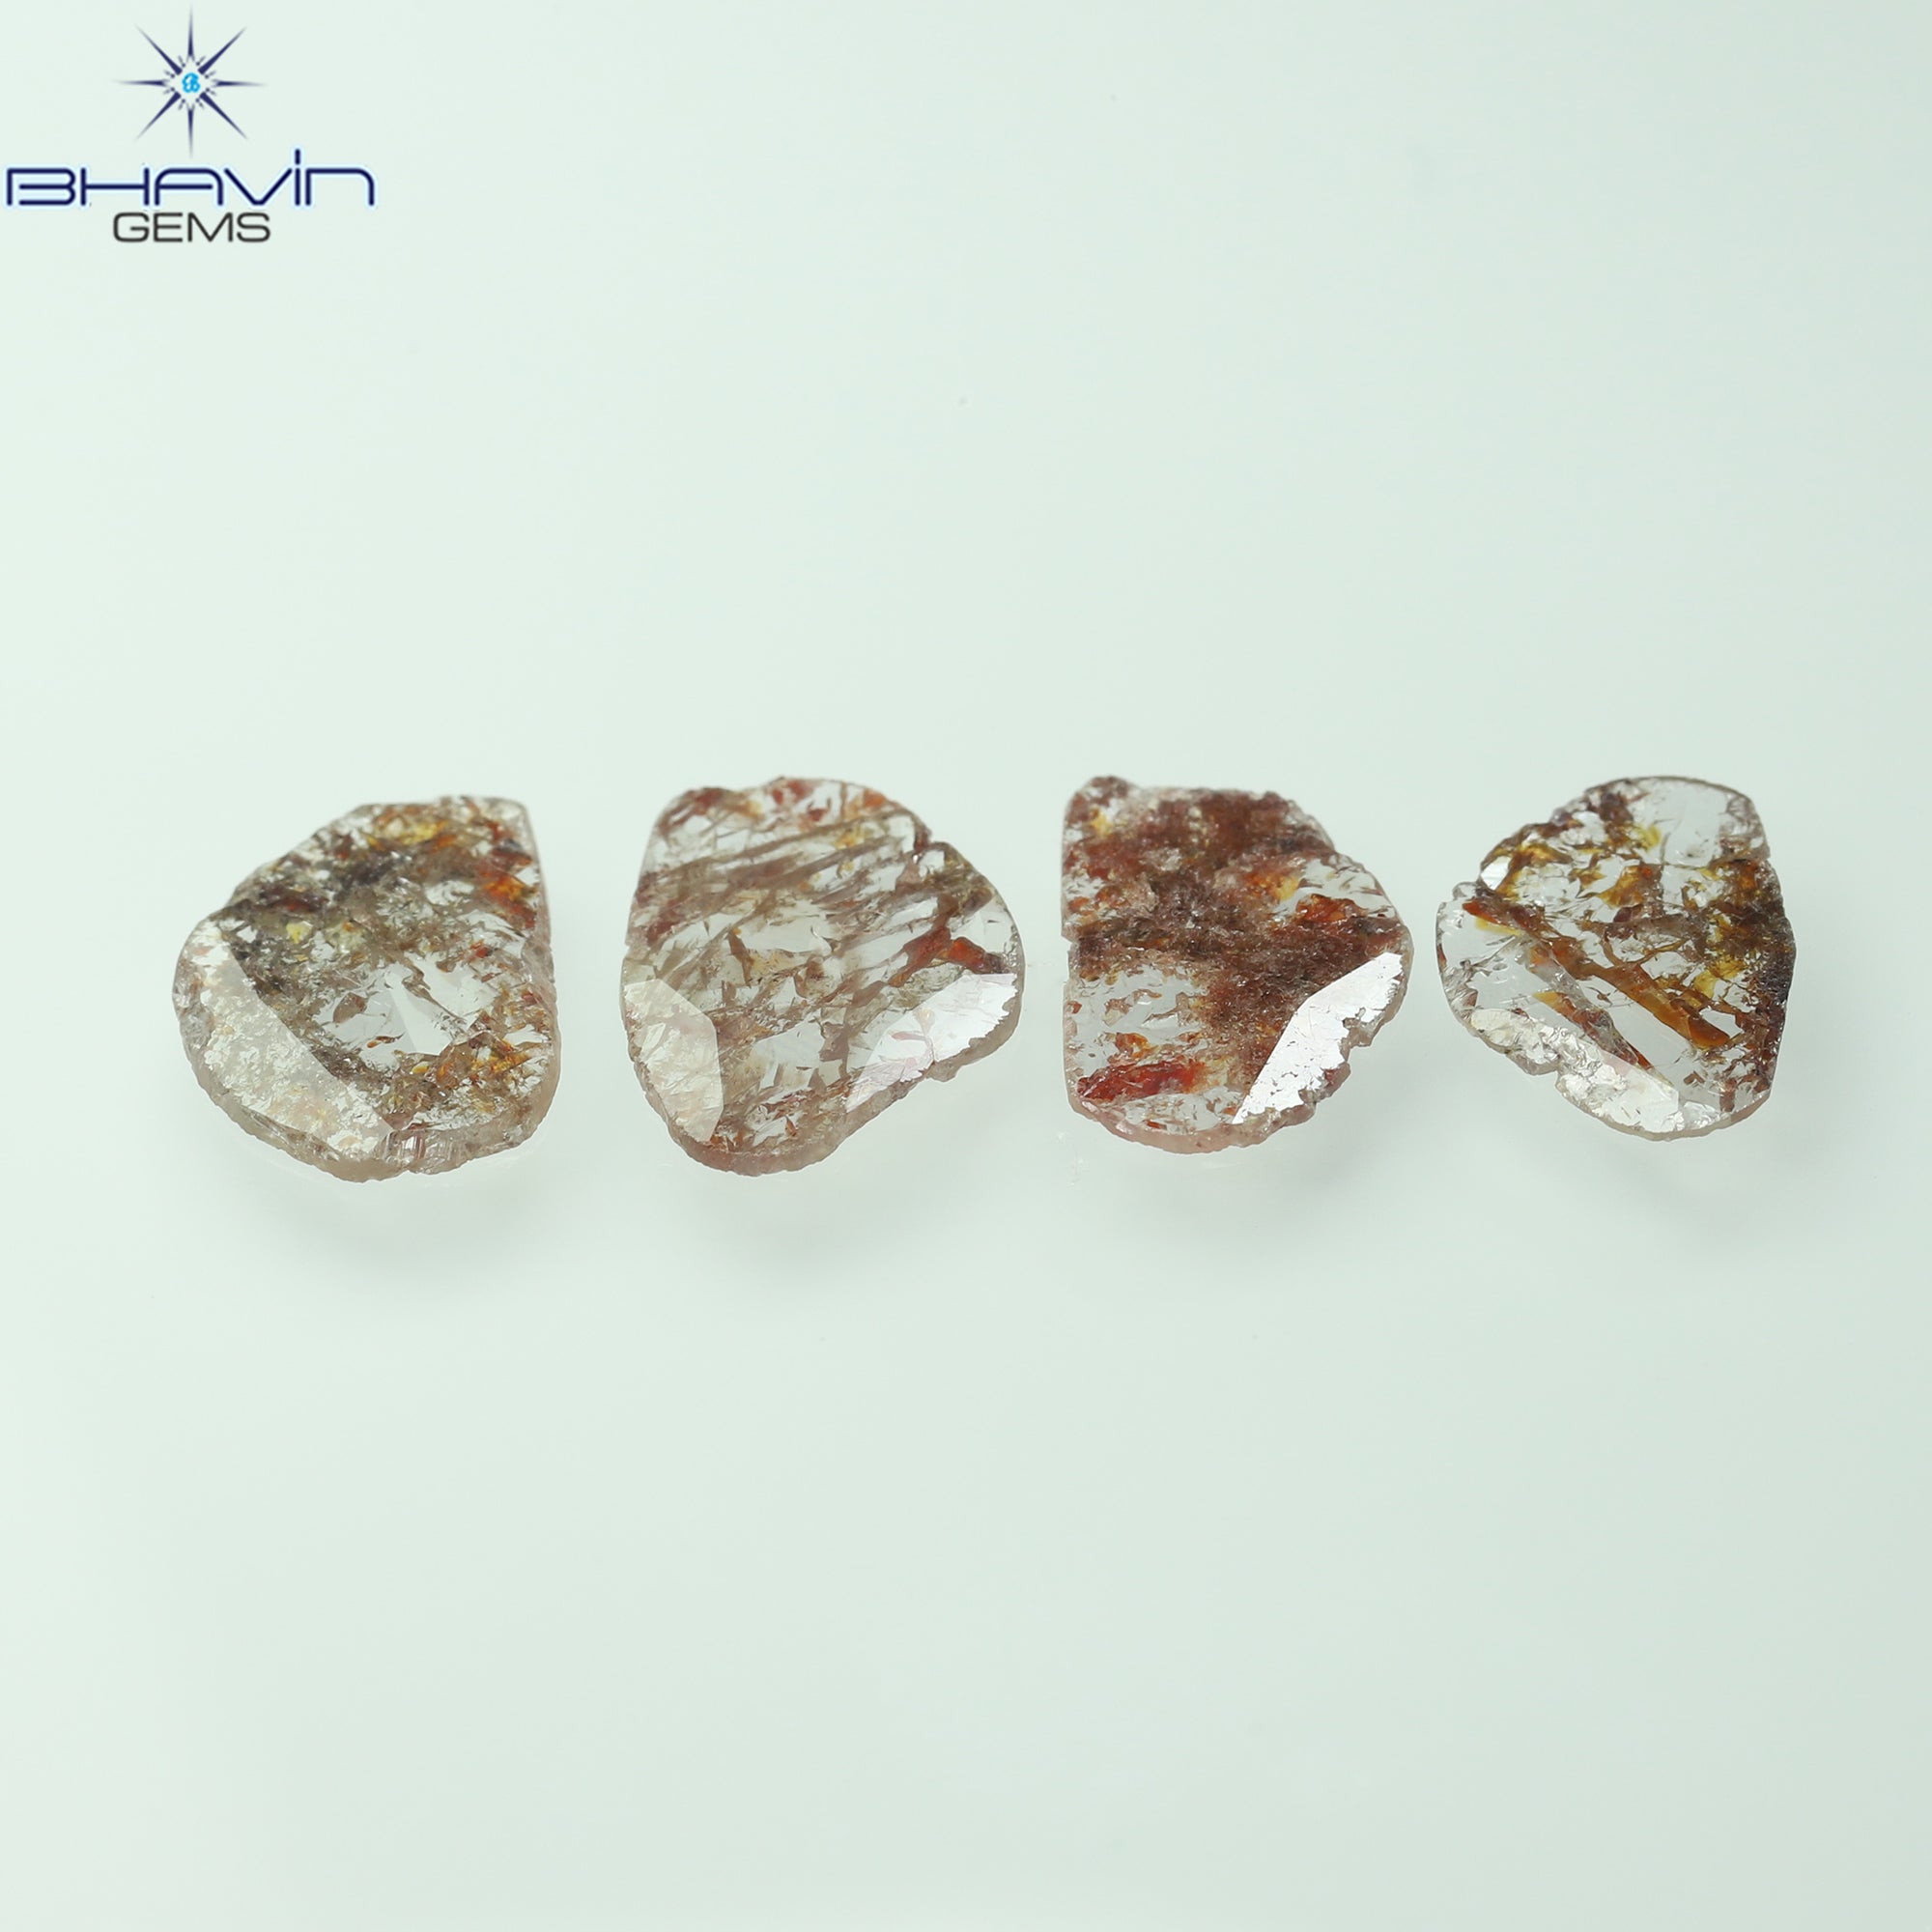 1.72 CT/4 Pcs Slice Shape Natural Loose Diamond Brown Color I3 Clarity (9.28 MM)